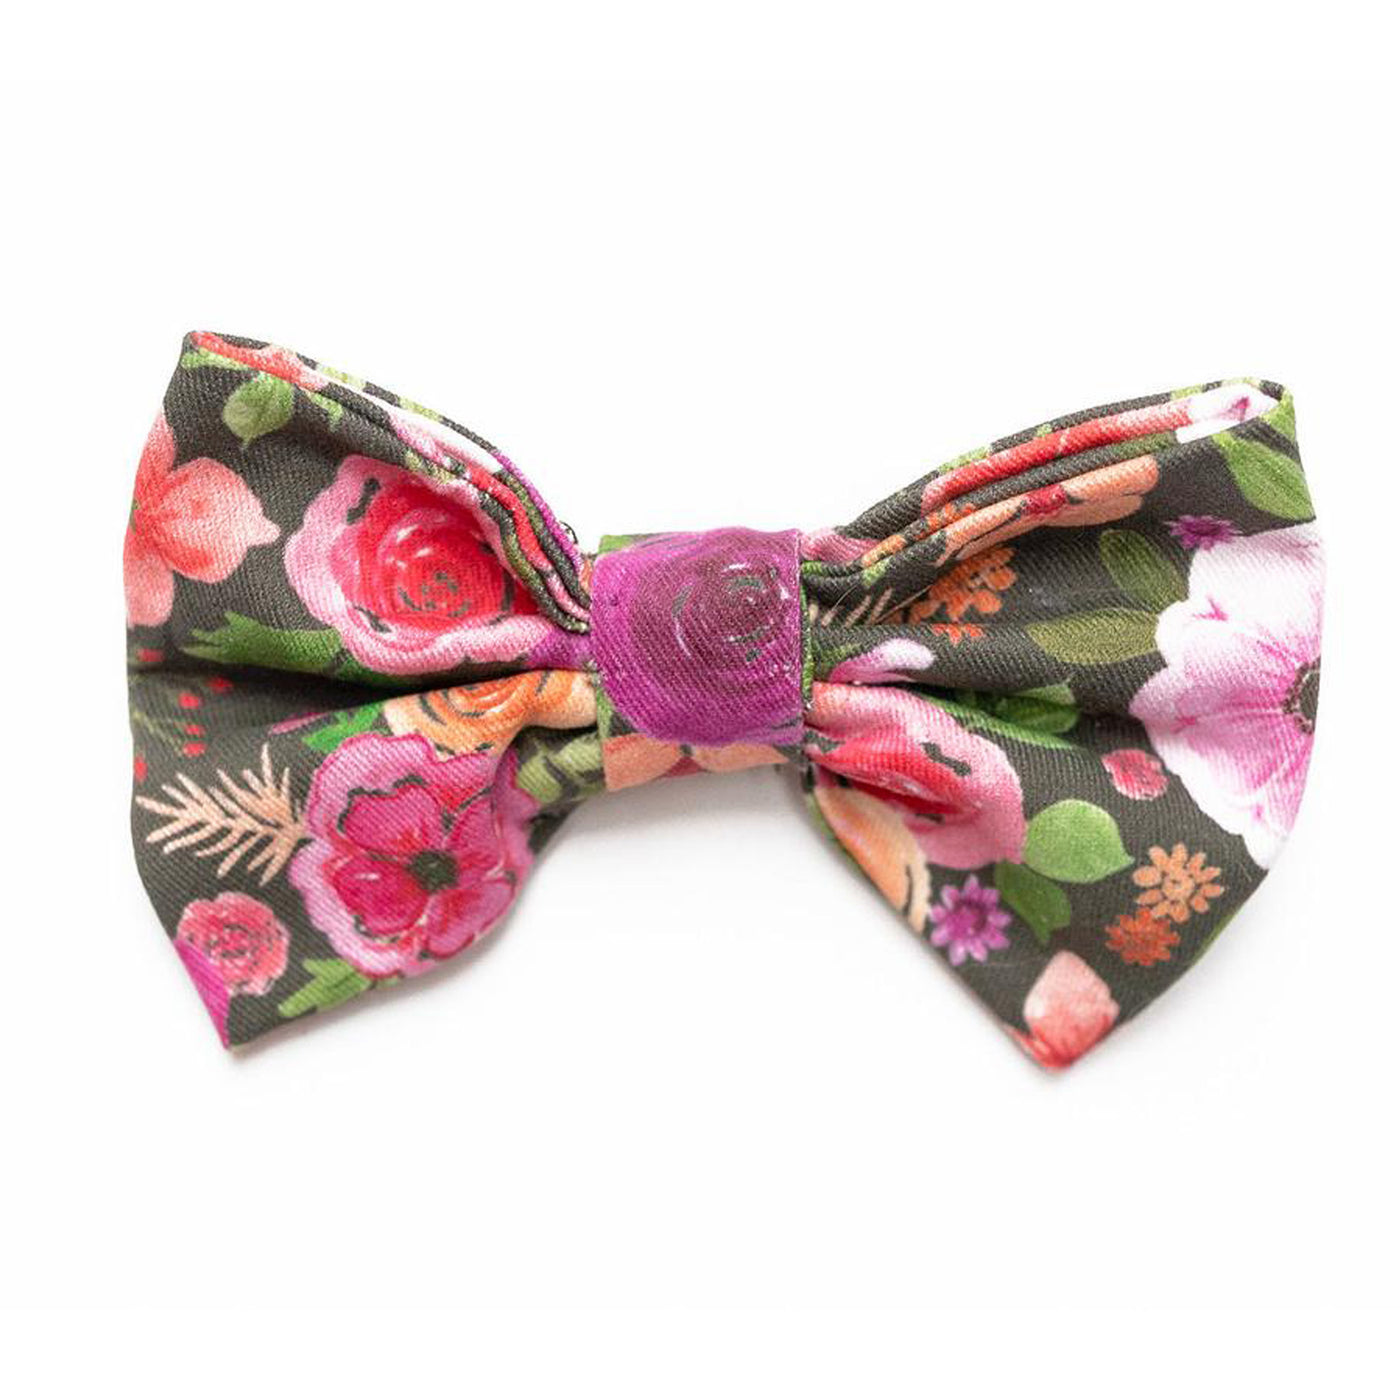 Classic dog bow tie in pink multi floral on gray